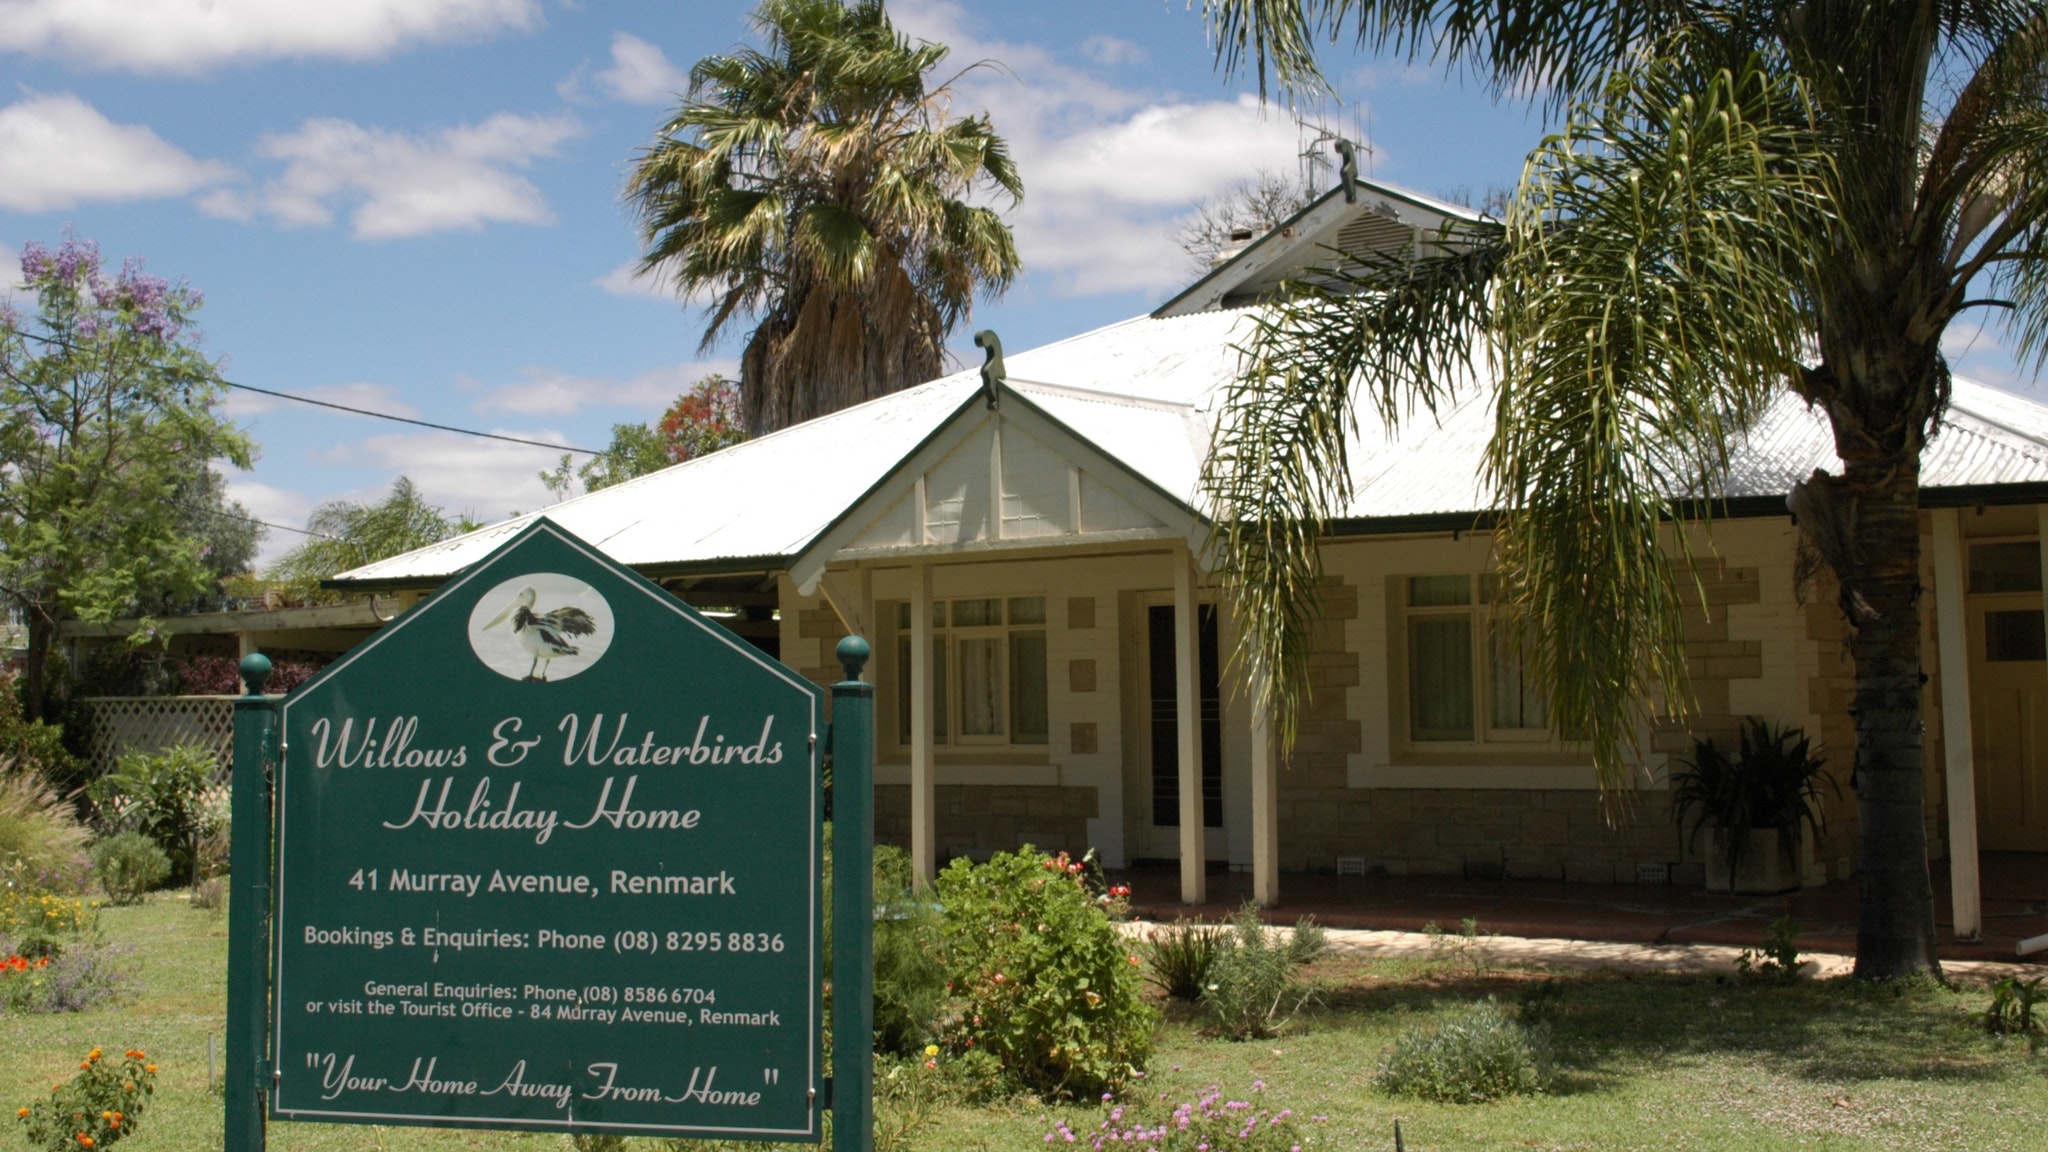 Renmark Holiday Home Willows  Waterbirds - Australia Accommodation